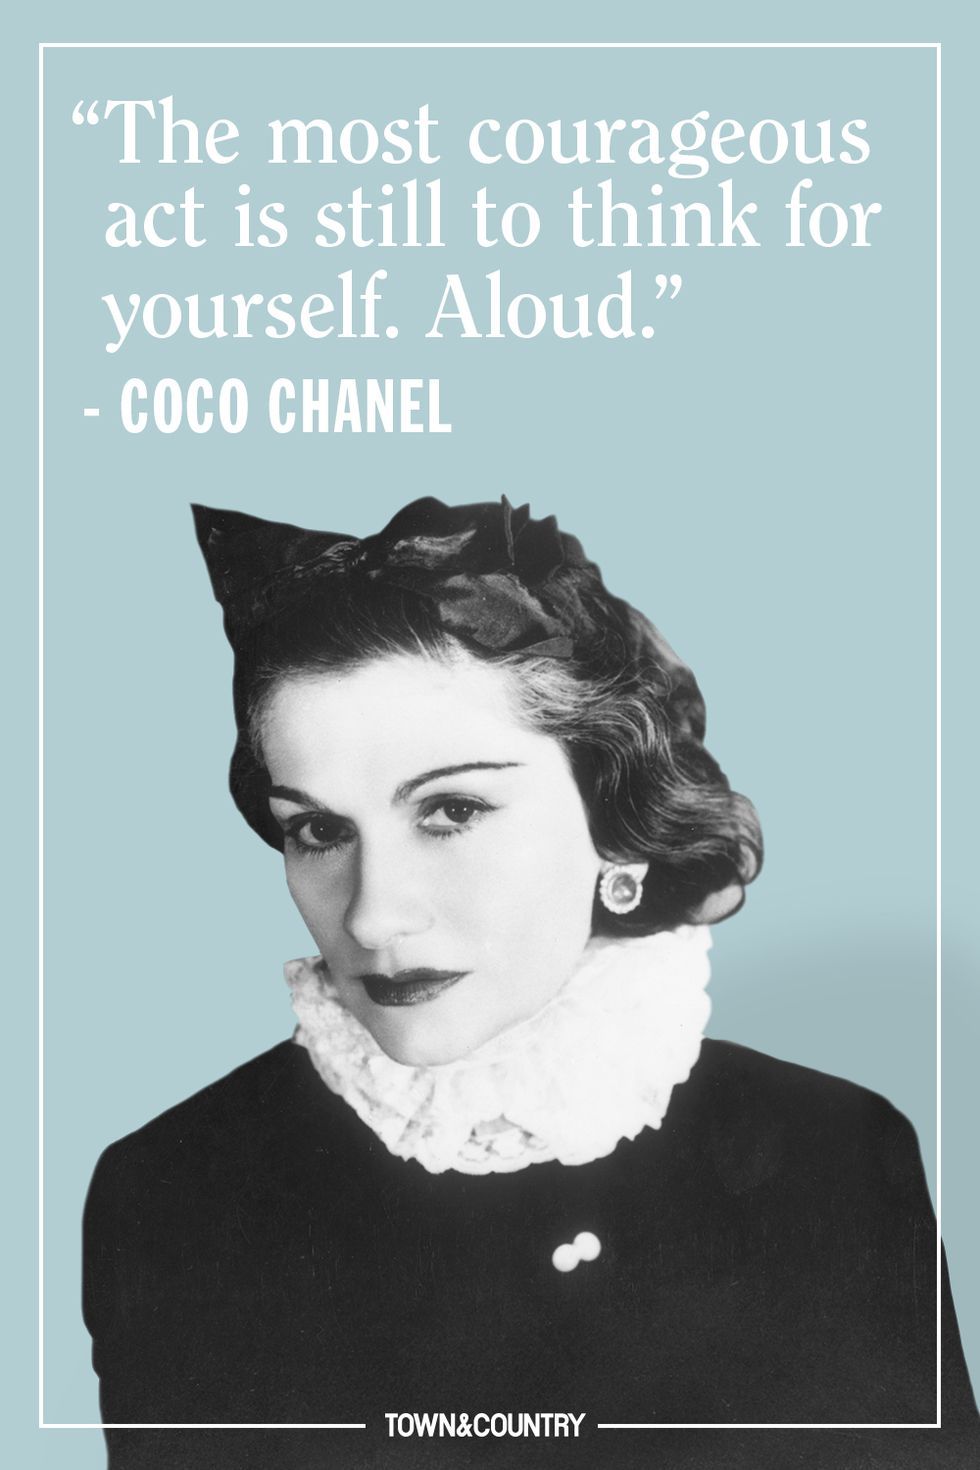 25 Chanel Quotes Every Woman Should Live By - Best Coco Sayings